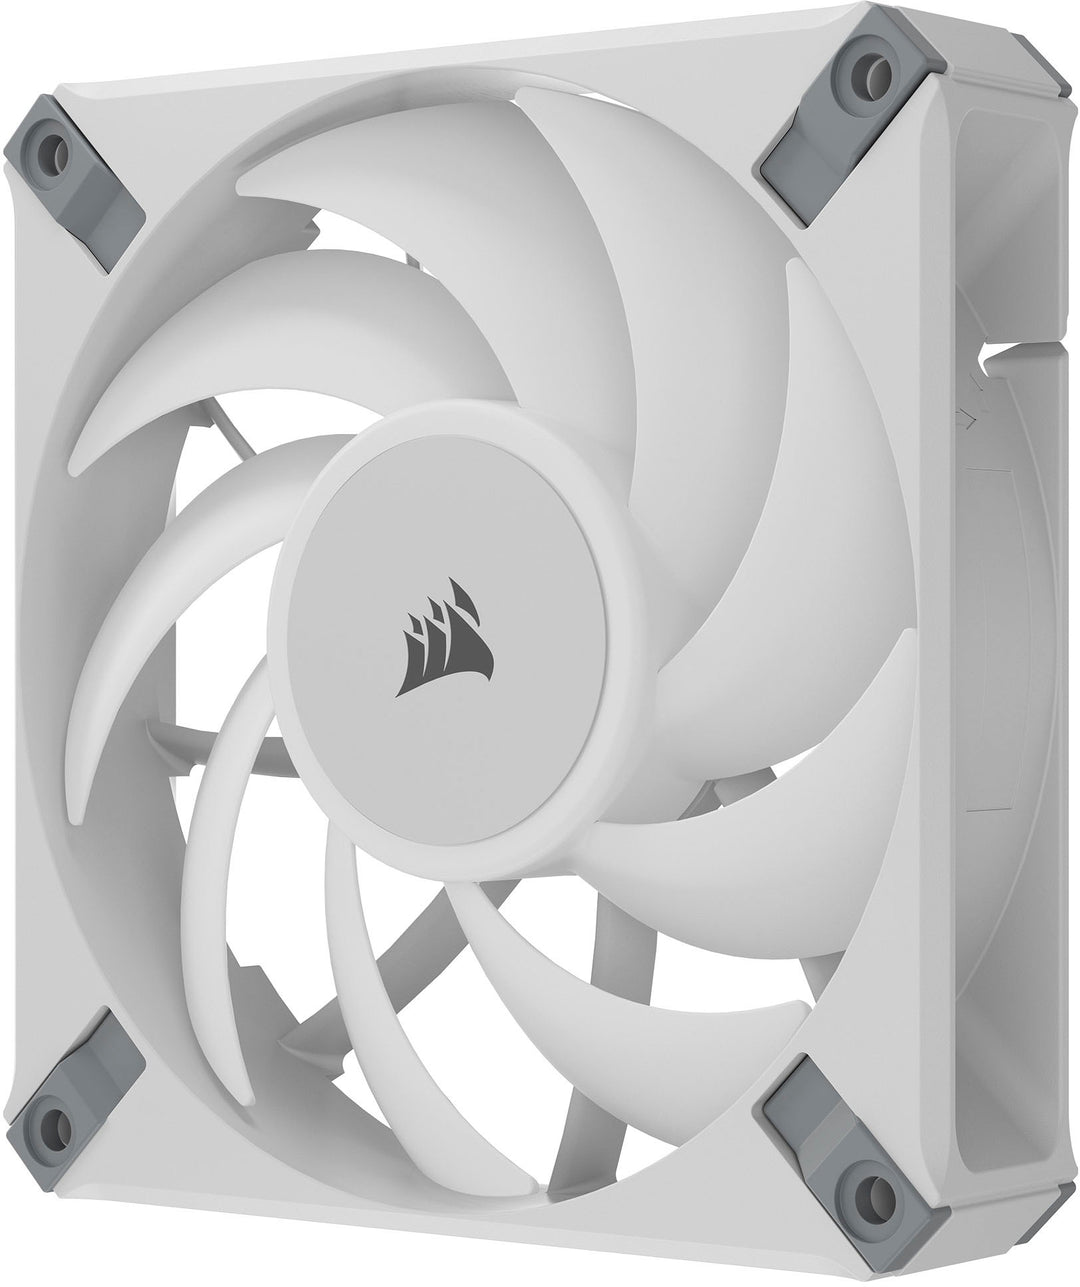 CORSAIR - AF120 RGB ELITE 120mm Fluid Dynamic Bearing Triple Fan Kit with AirGuide Technology - White_5